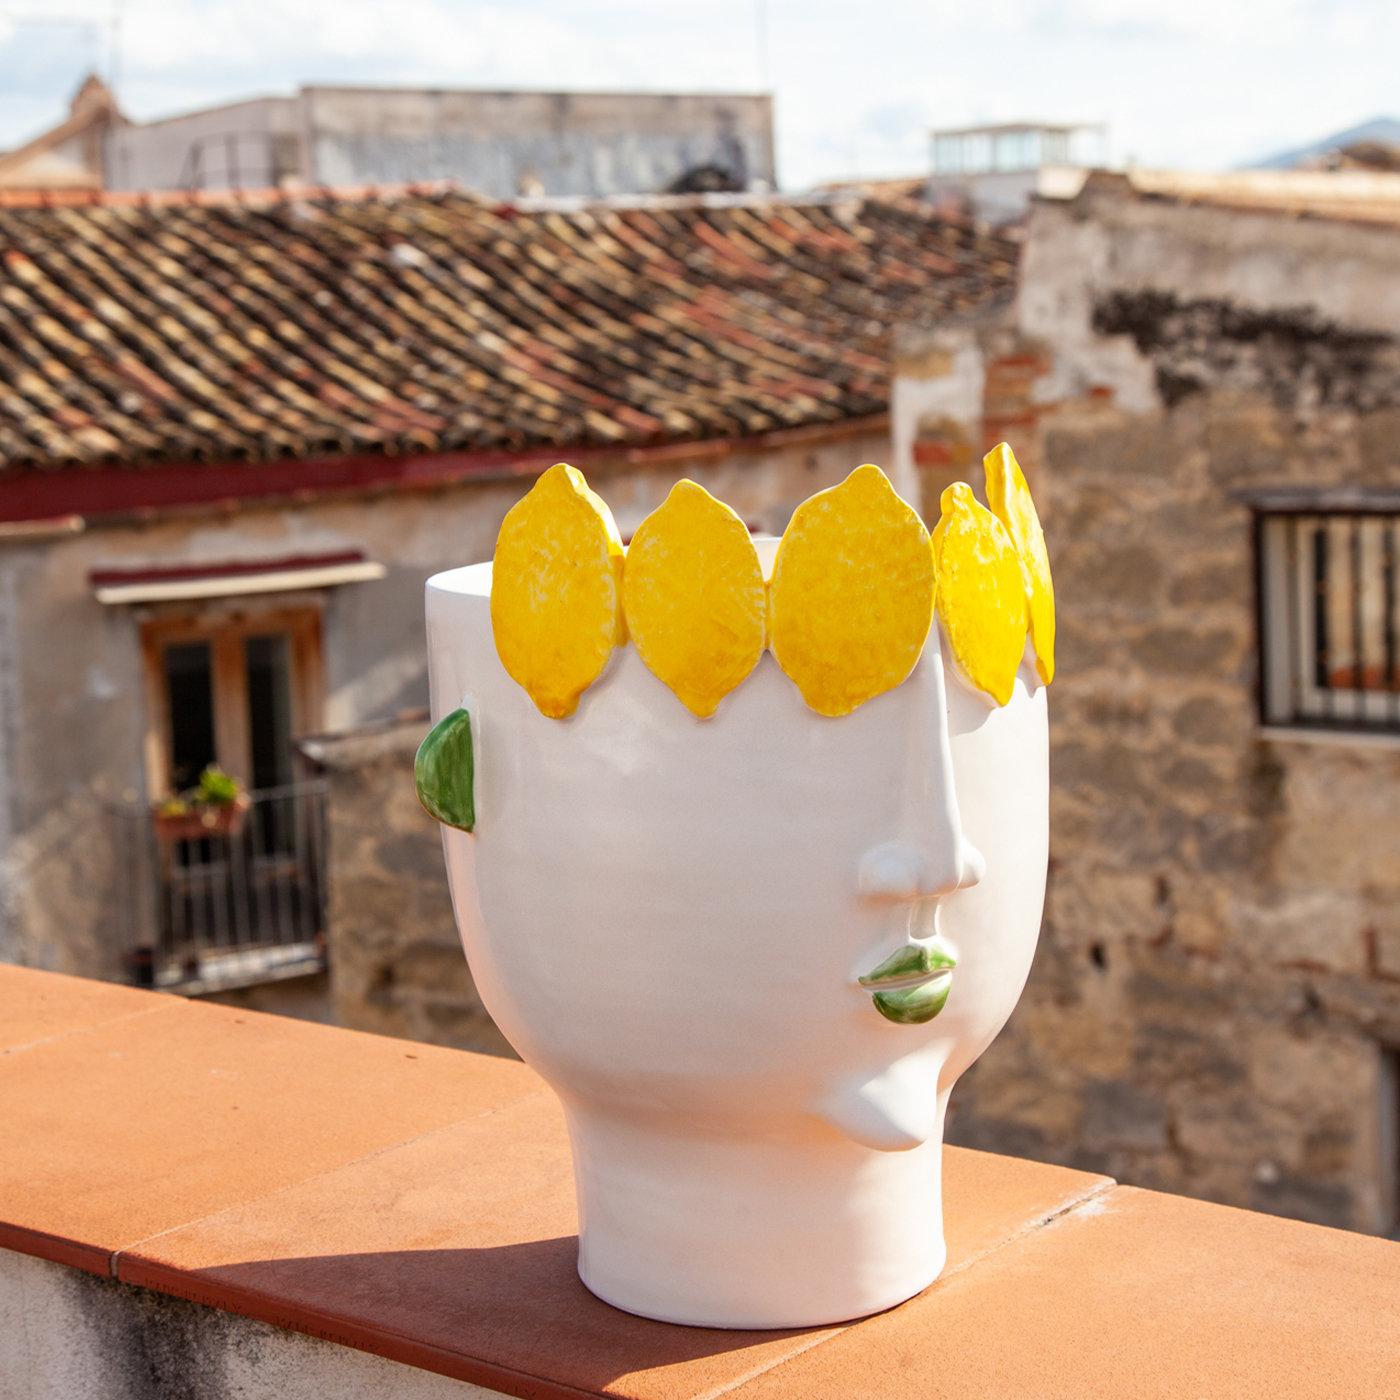 This entirely unique, head-shaped vase in matte white ceramic was handcrafted as an homage to the folk value of Sicilian street markets. Its anthropomorphic design was inspired by Filomena, a street vendor of lemons. Suitable for both indoor and